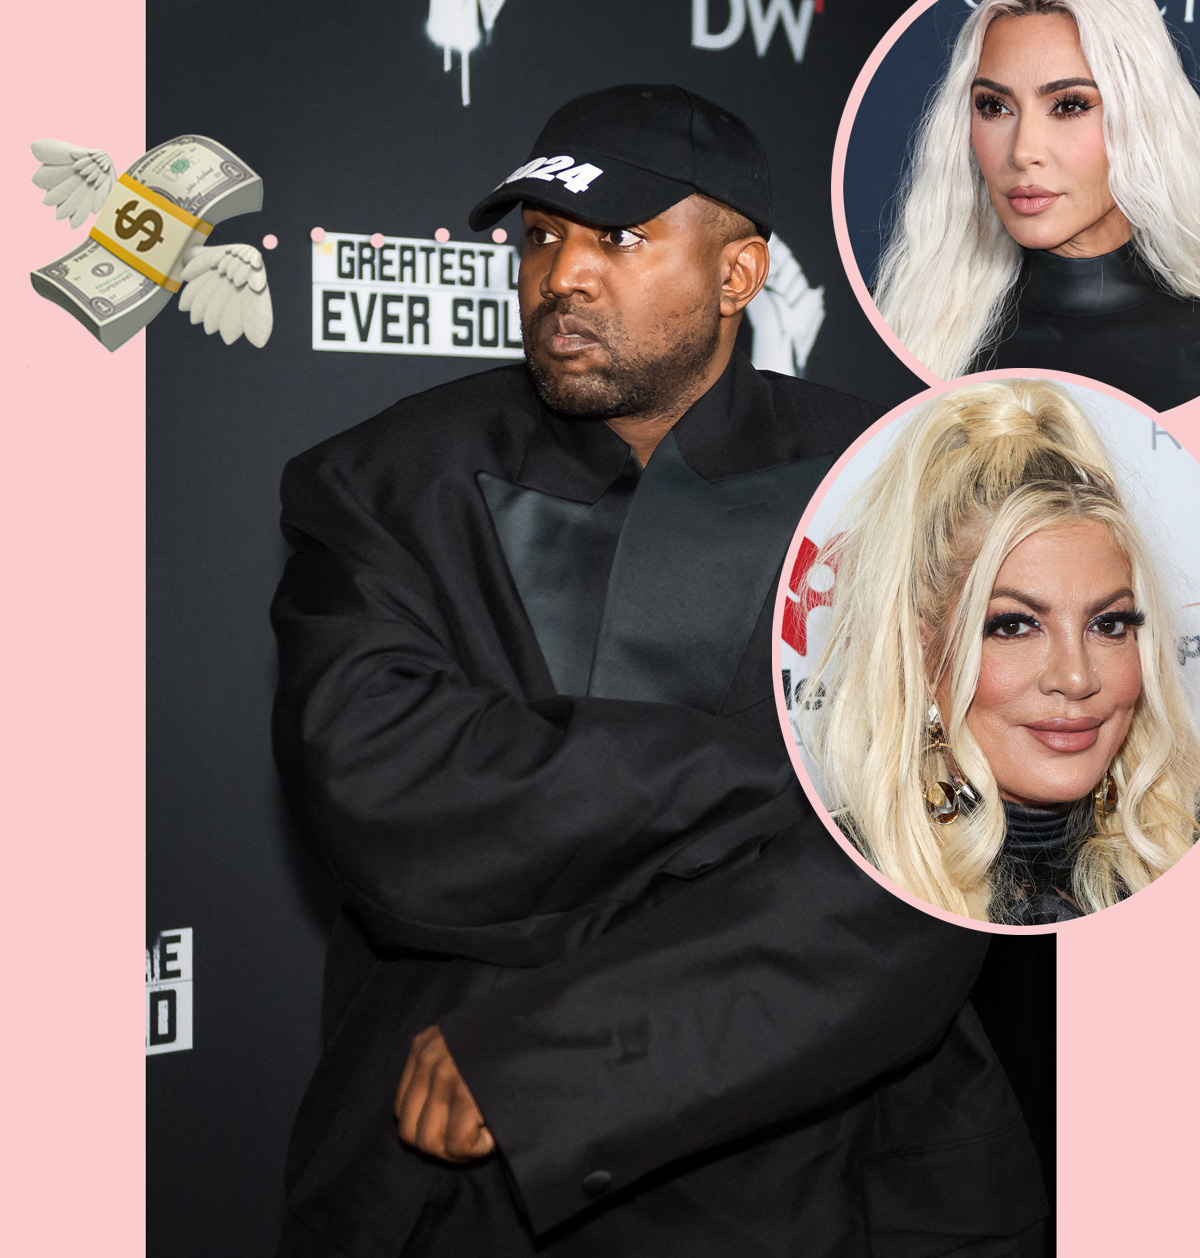 #Kanye West & More Stars With Questionable Spending Habits!